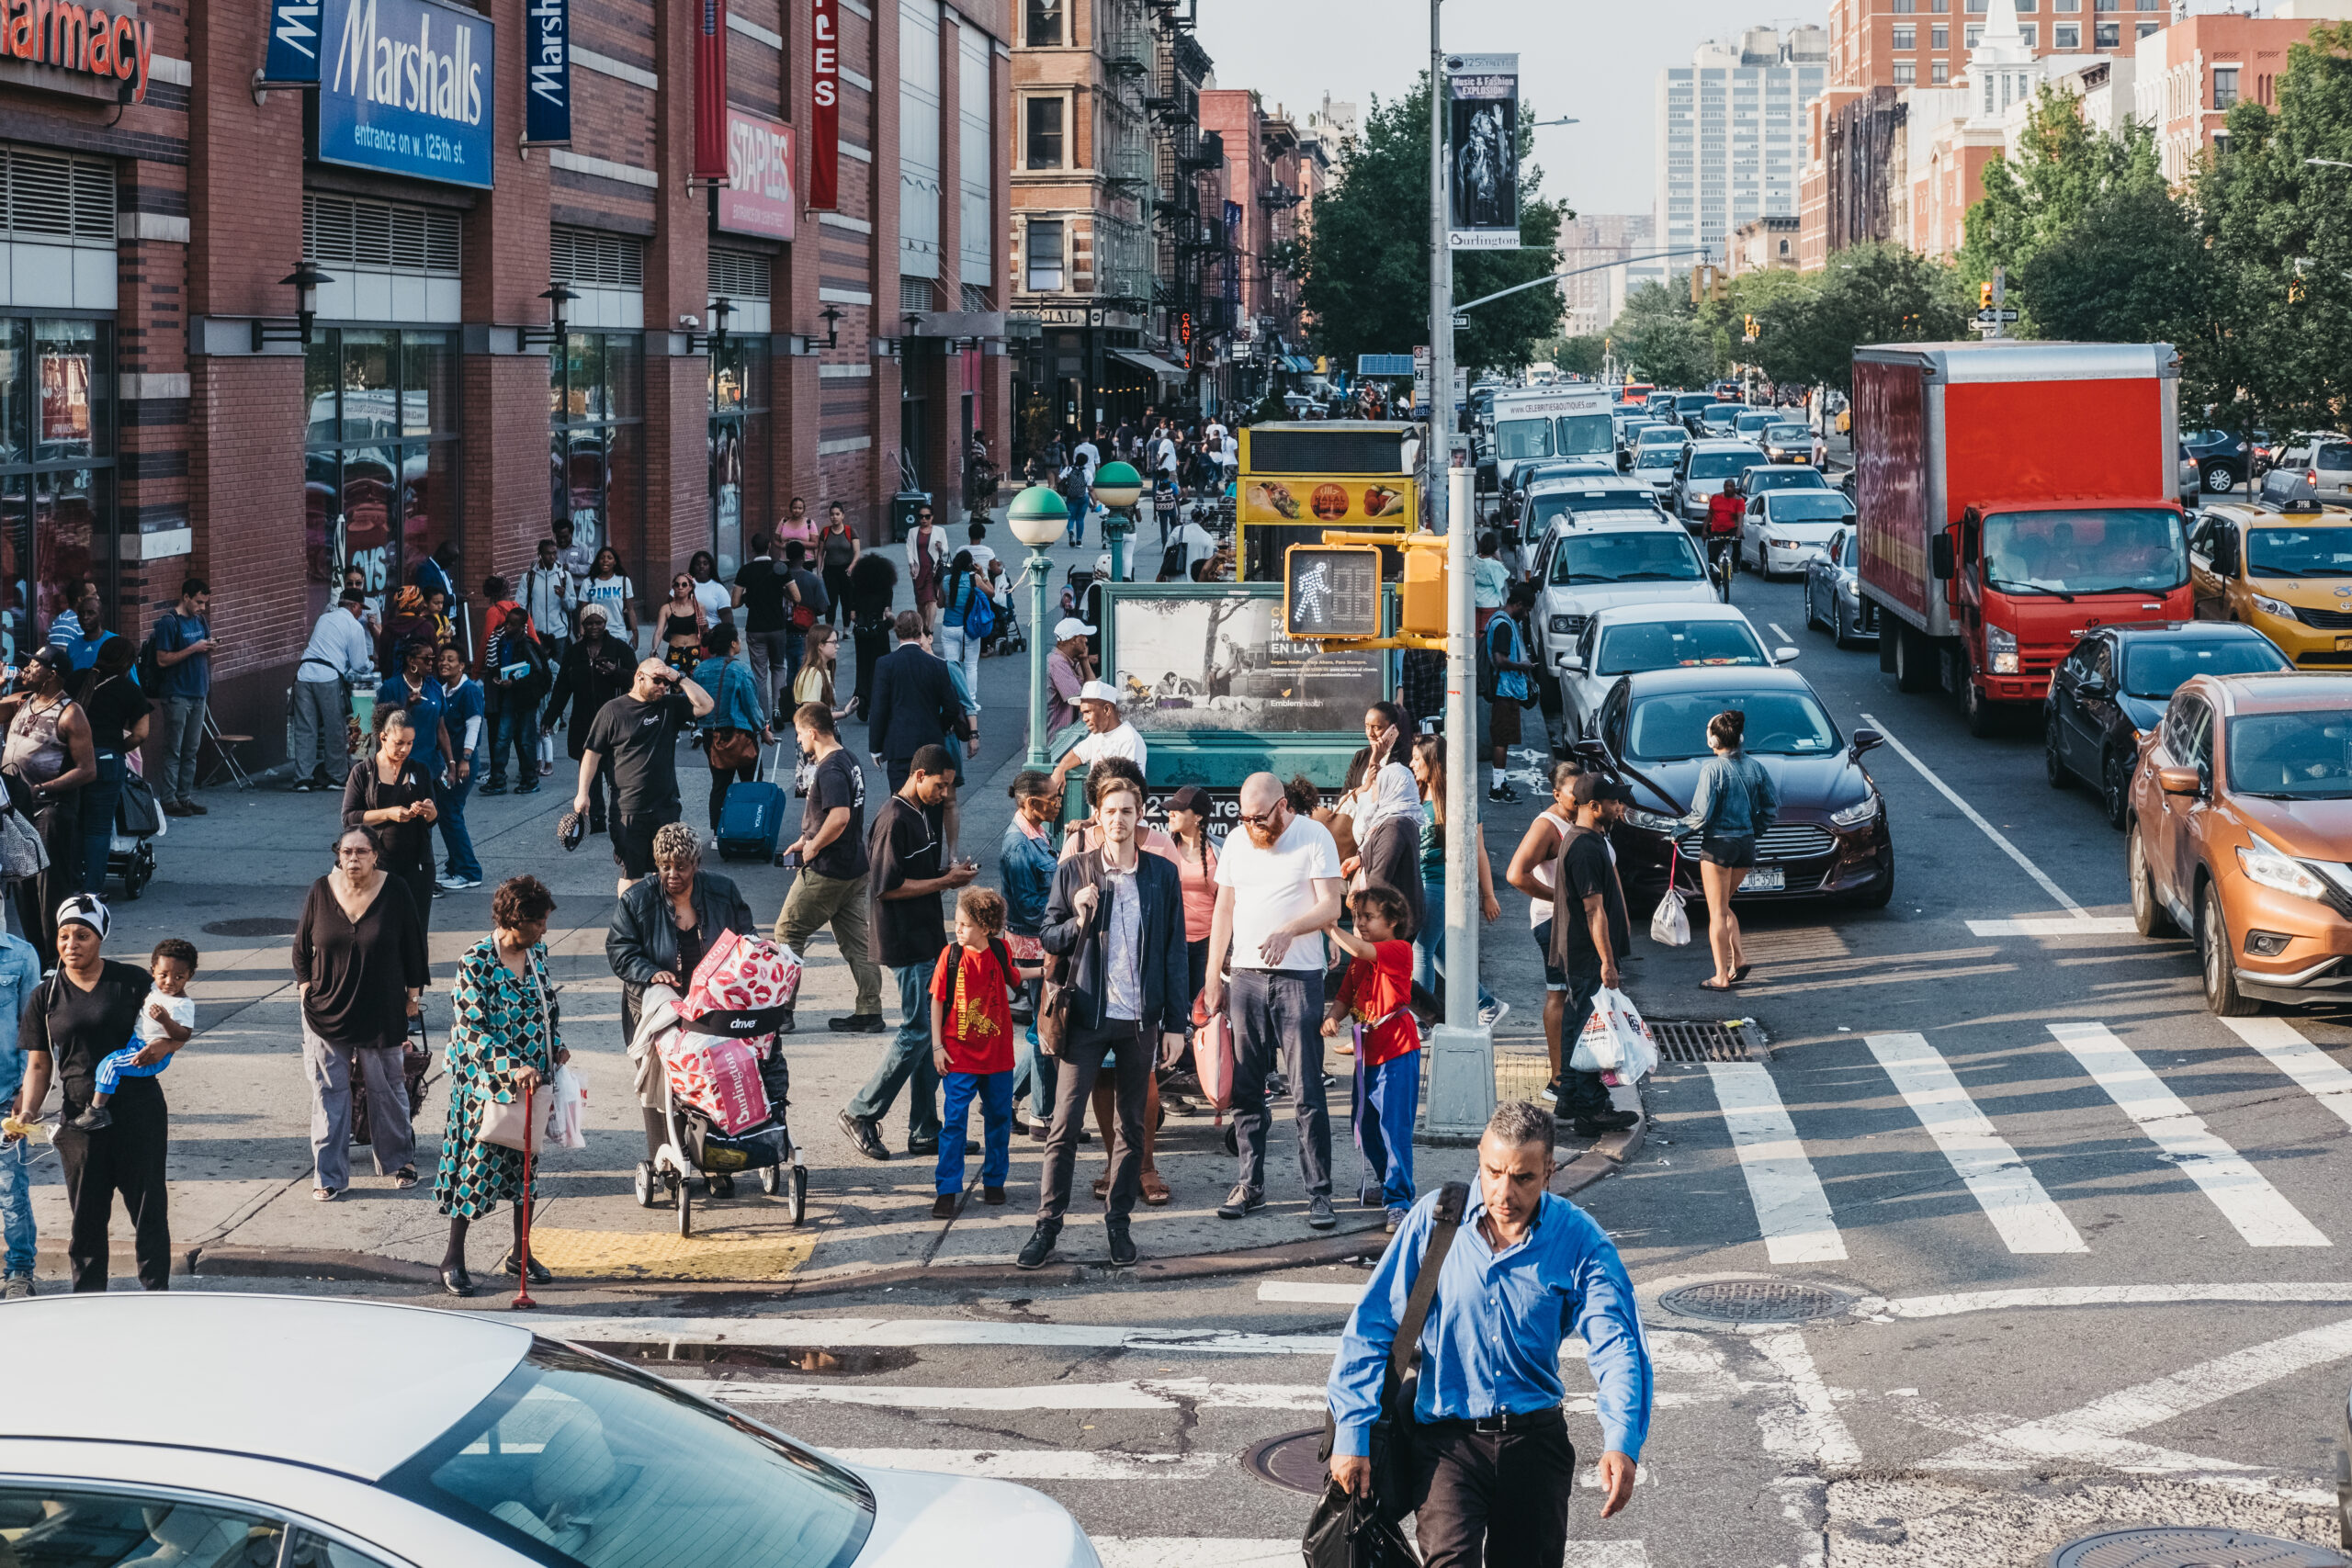 Air pollution can ruin the health benefits of ‘walkable’ neighborhoods